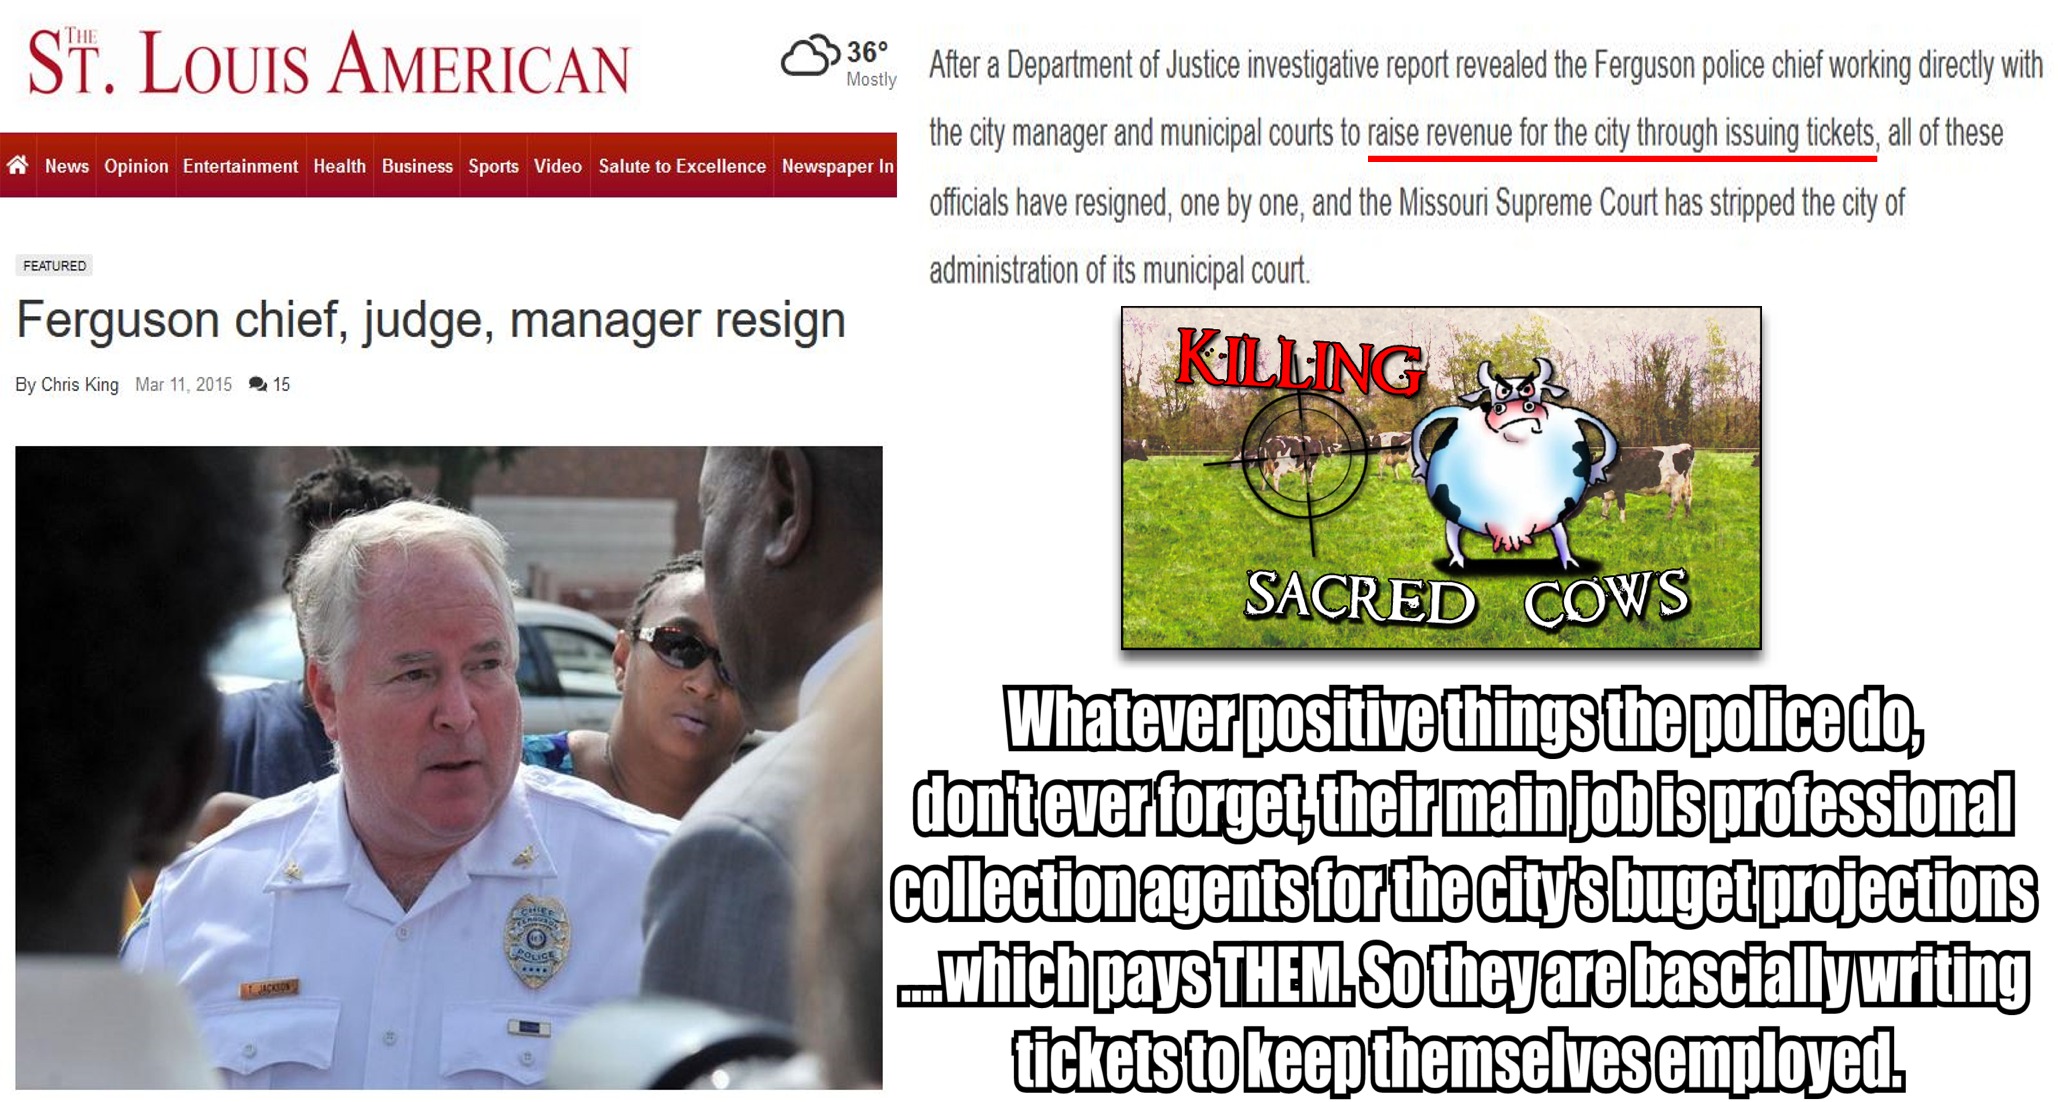 media - St. Louis Am Erican 36. Alera Department of Justice investigative report revealed the Ferguson police chief working directly with the city manager and municipal courts to raise revenue for the city through issuing tickets, all of these officials h